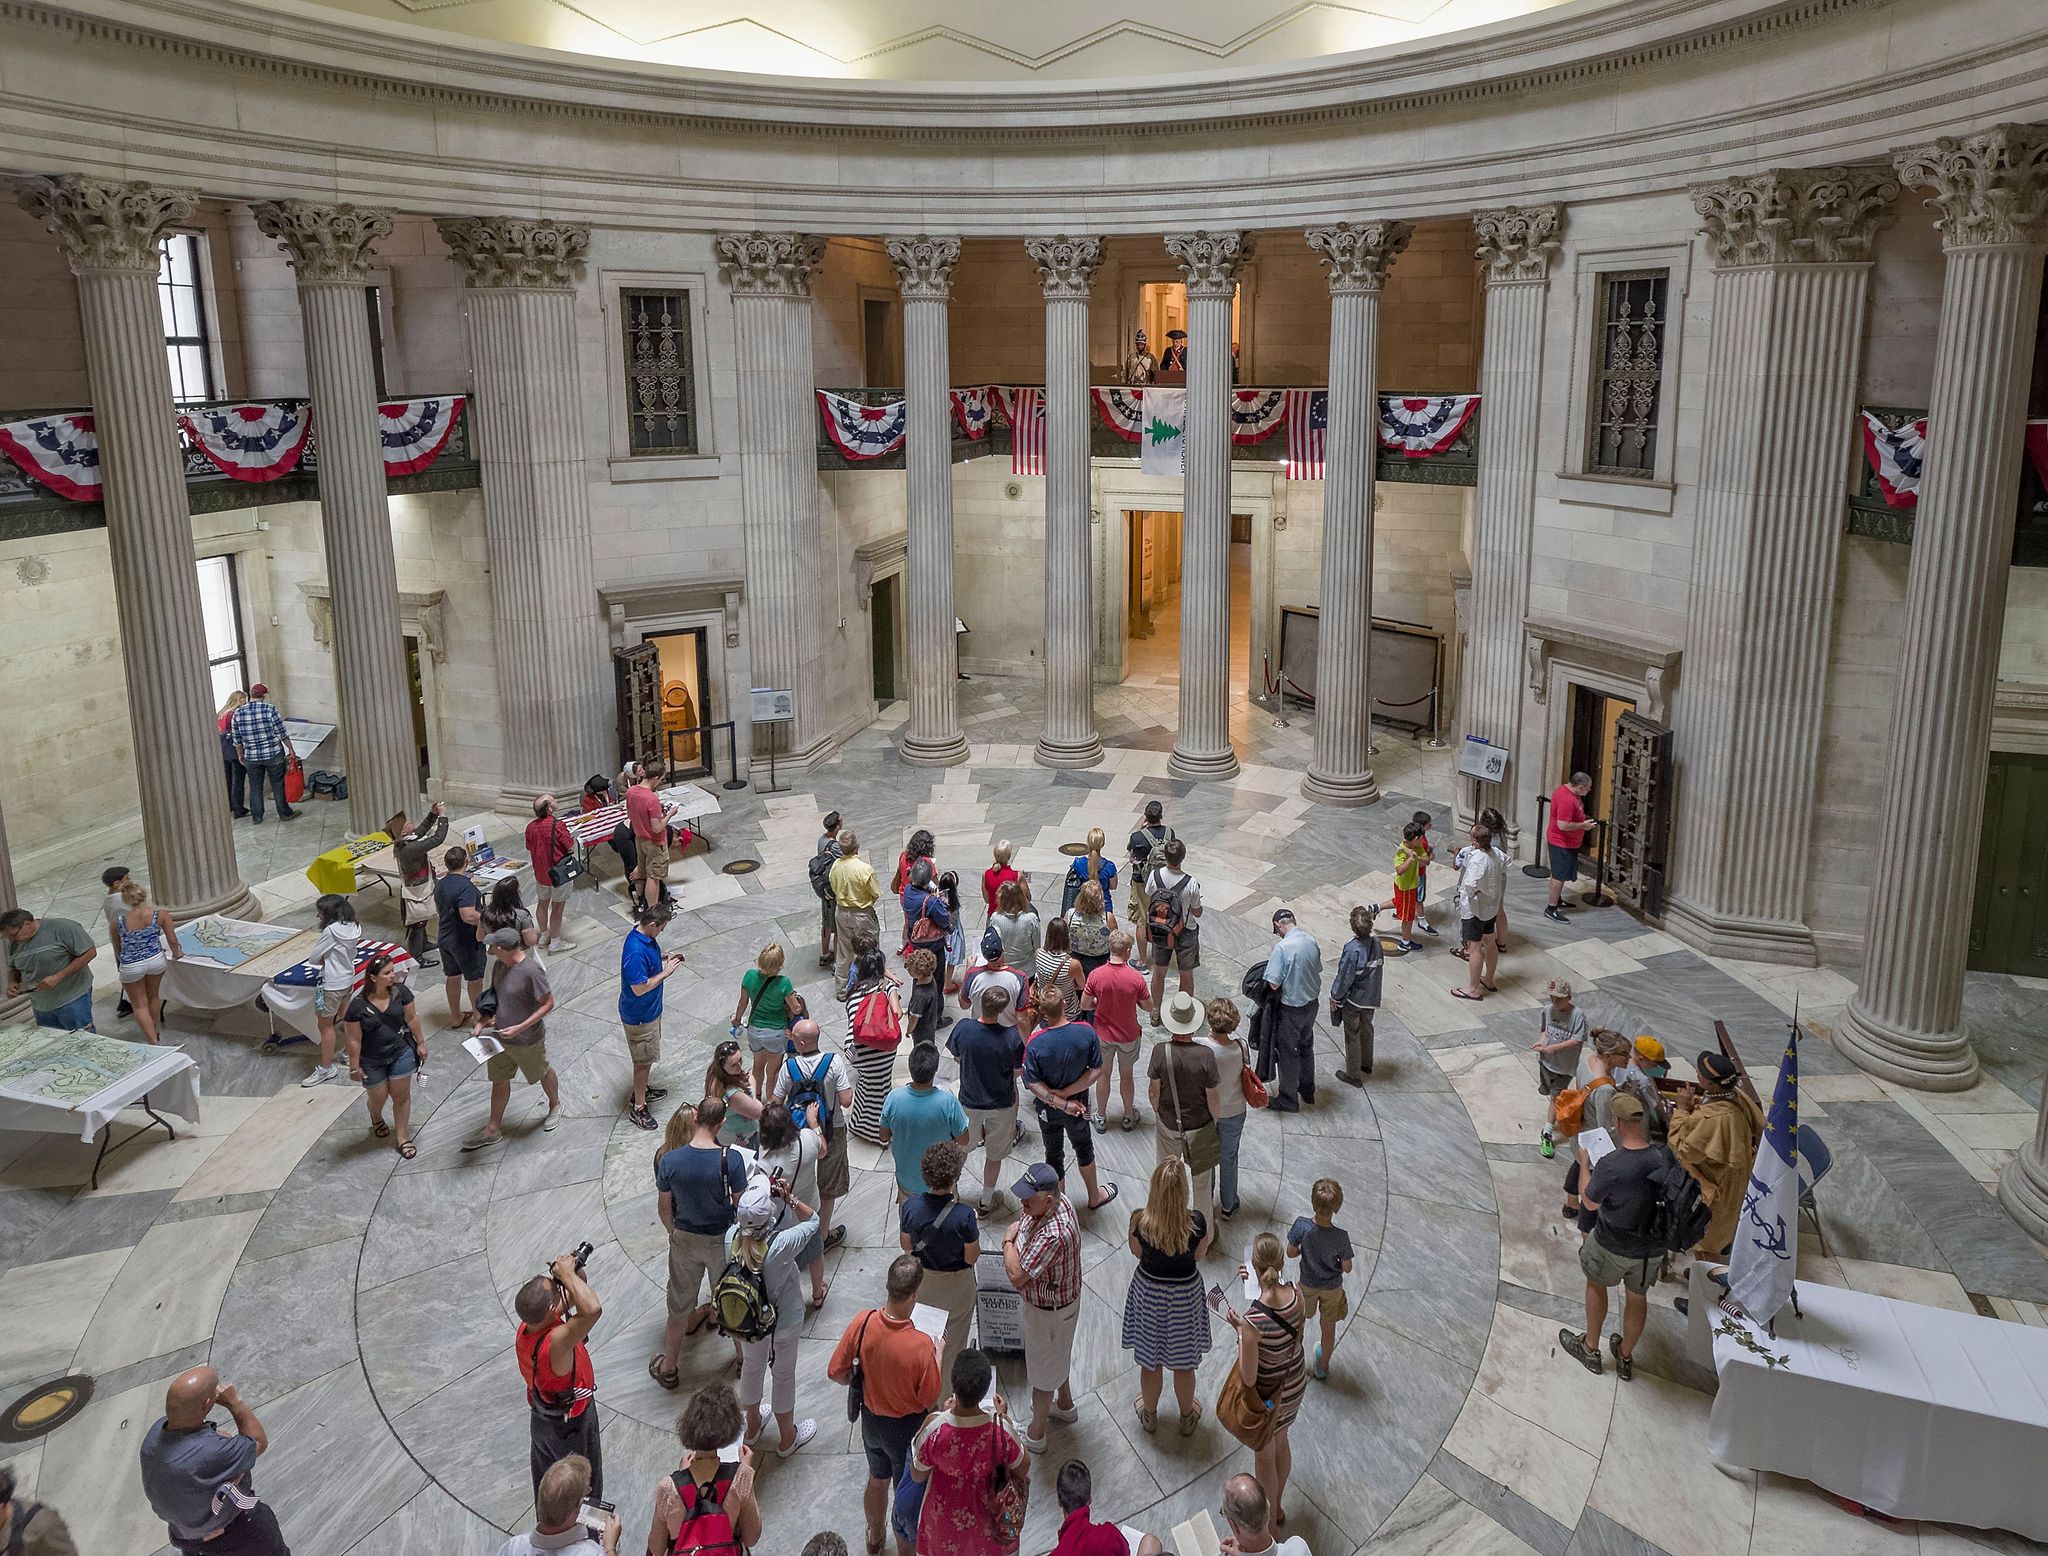 Thousands of visitors each year visit Federal Hall National Memorial